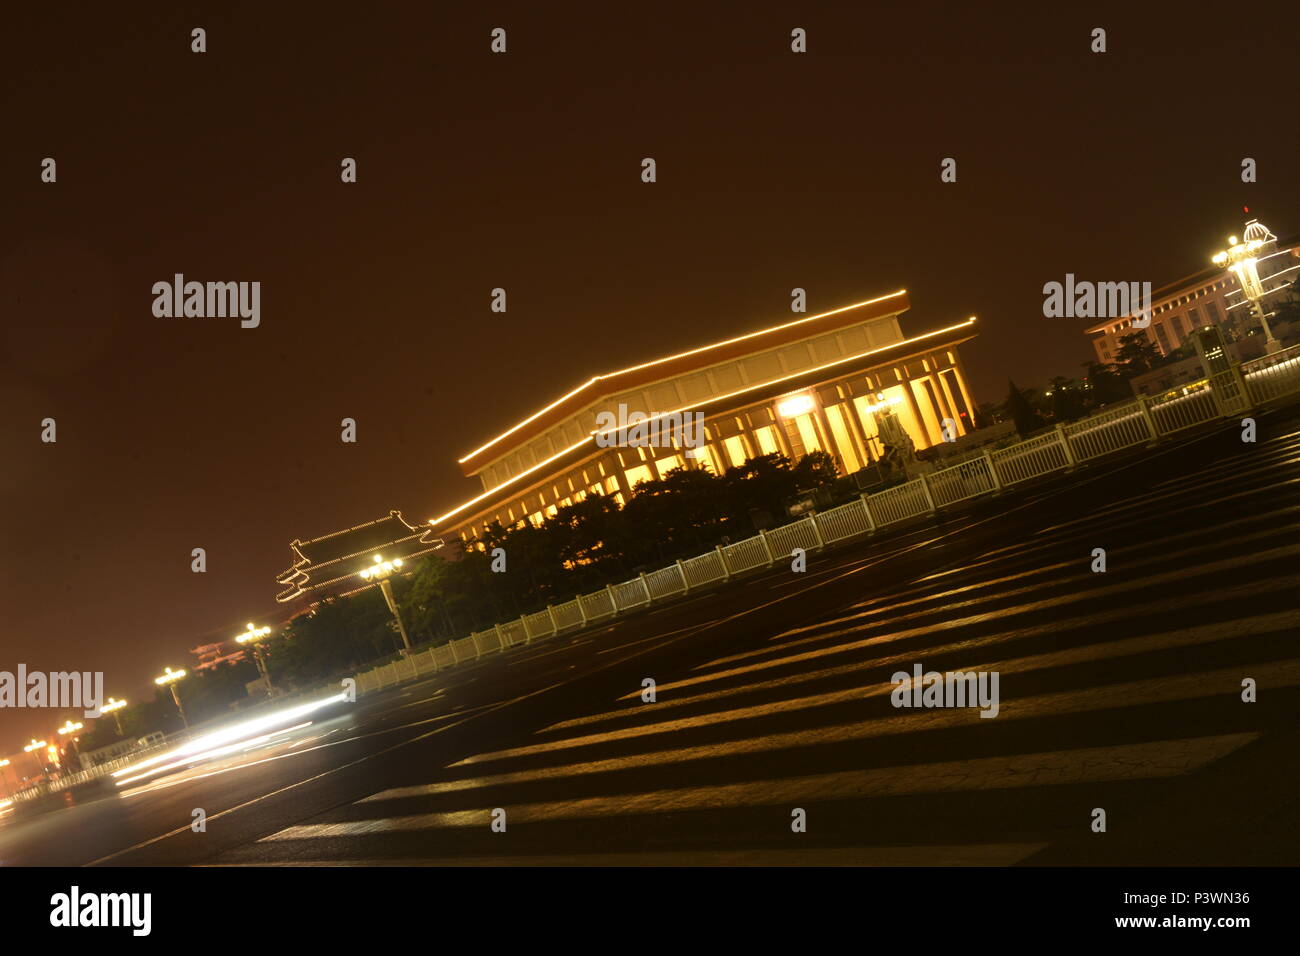 CHINA/BEIJING LE 08/05/2014 THE CITY OF BEIJING Stock Photo